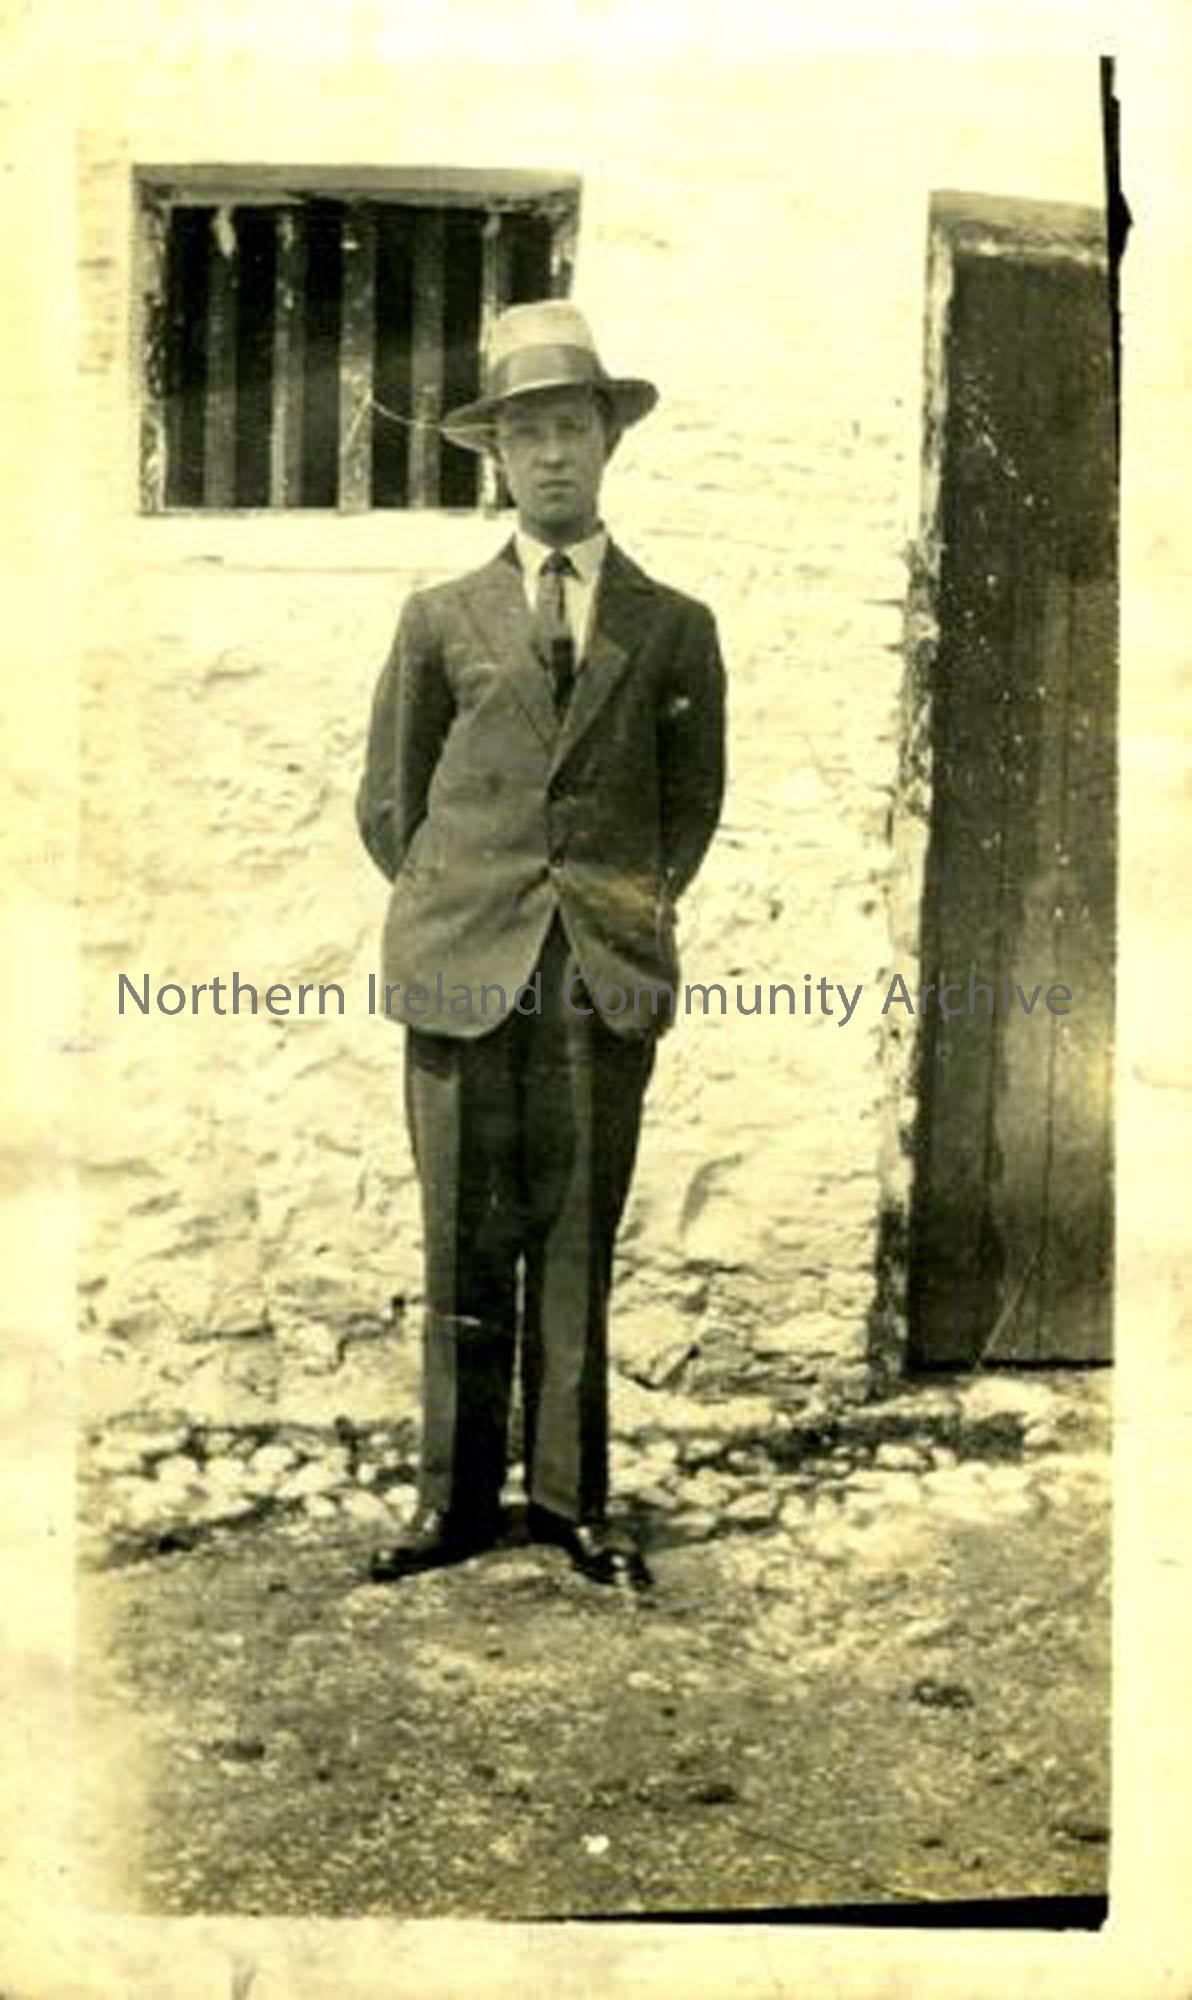 Patrick McErlain. The McErlains were rabbit and poultry dealers whose house and business stood where the Castle Community Association building is now. (5091)